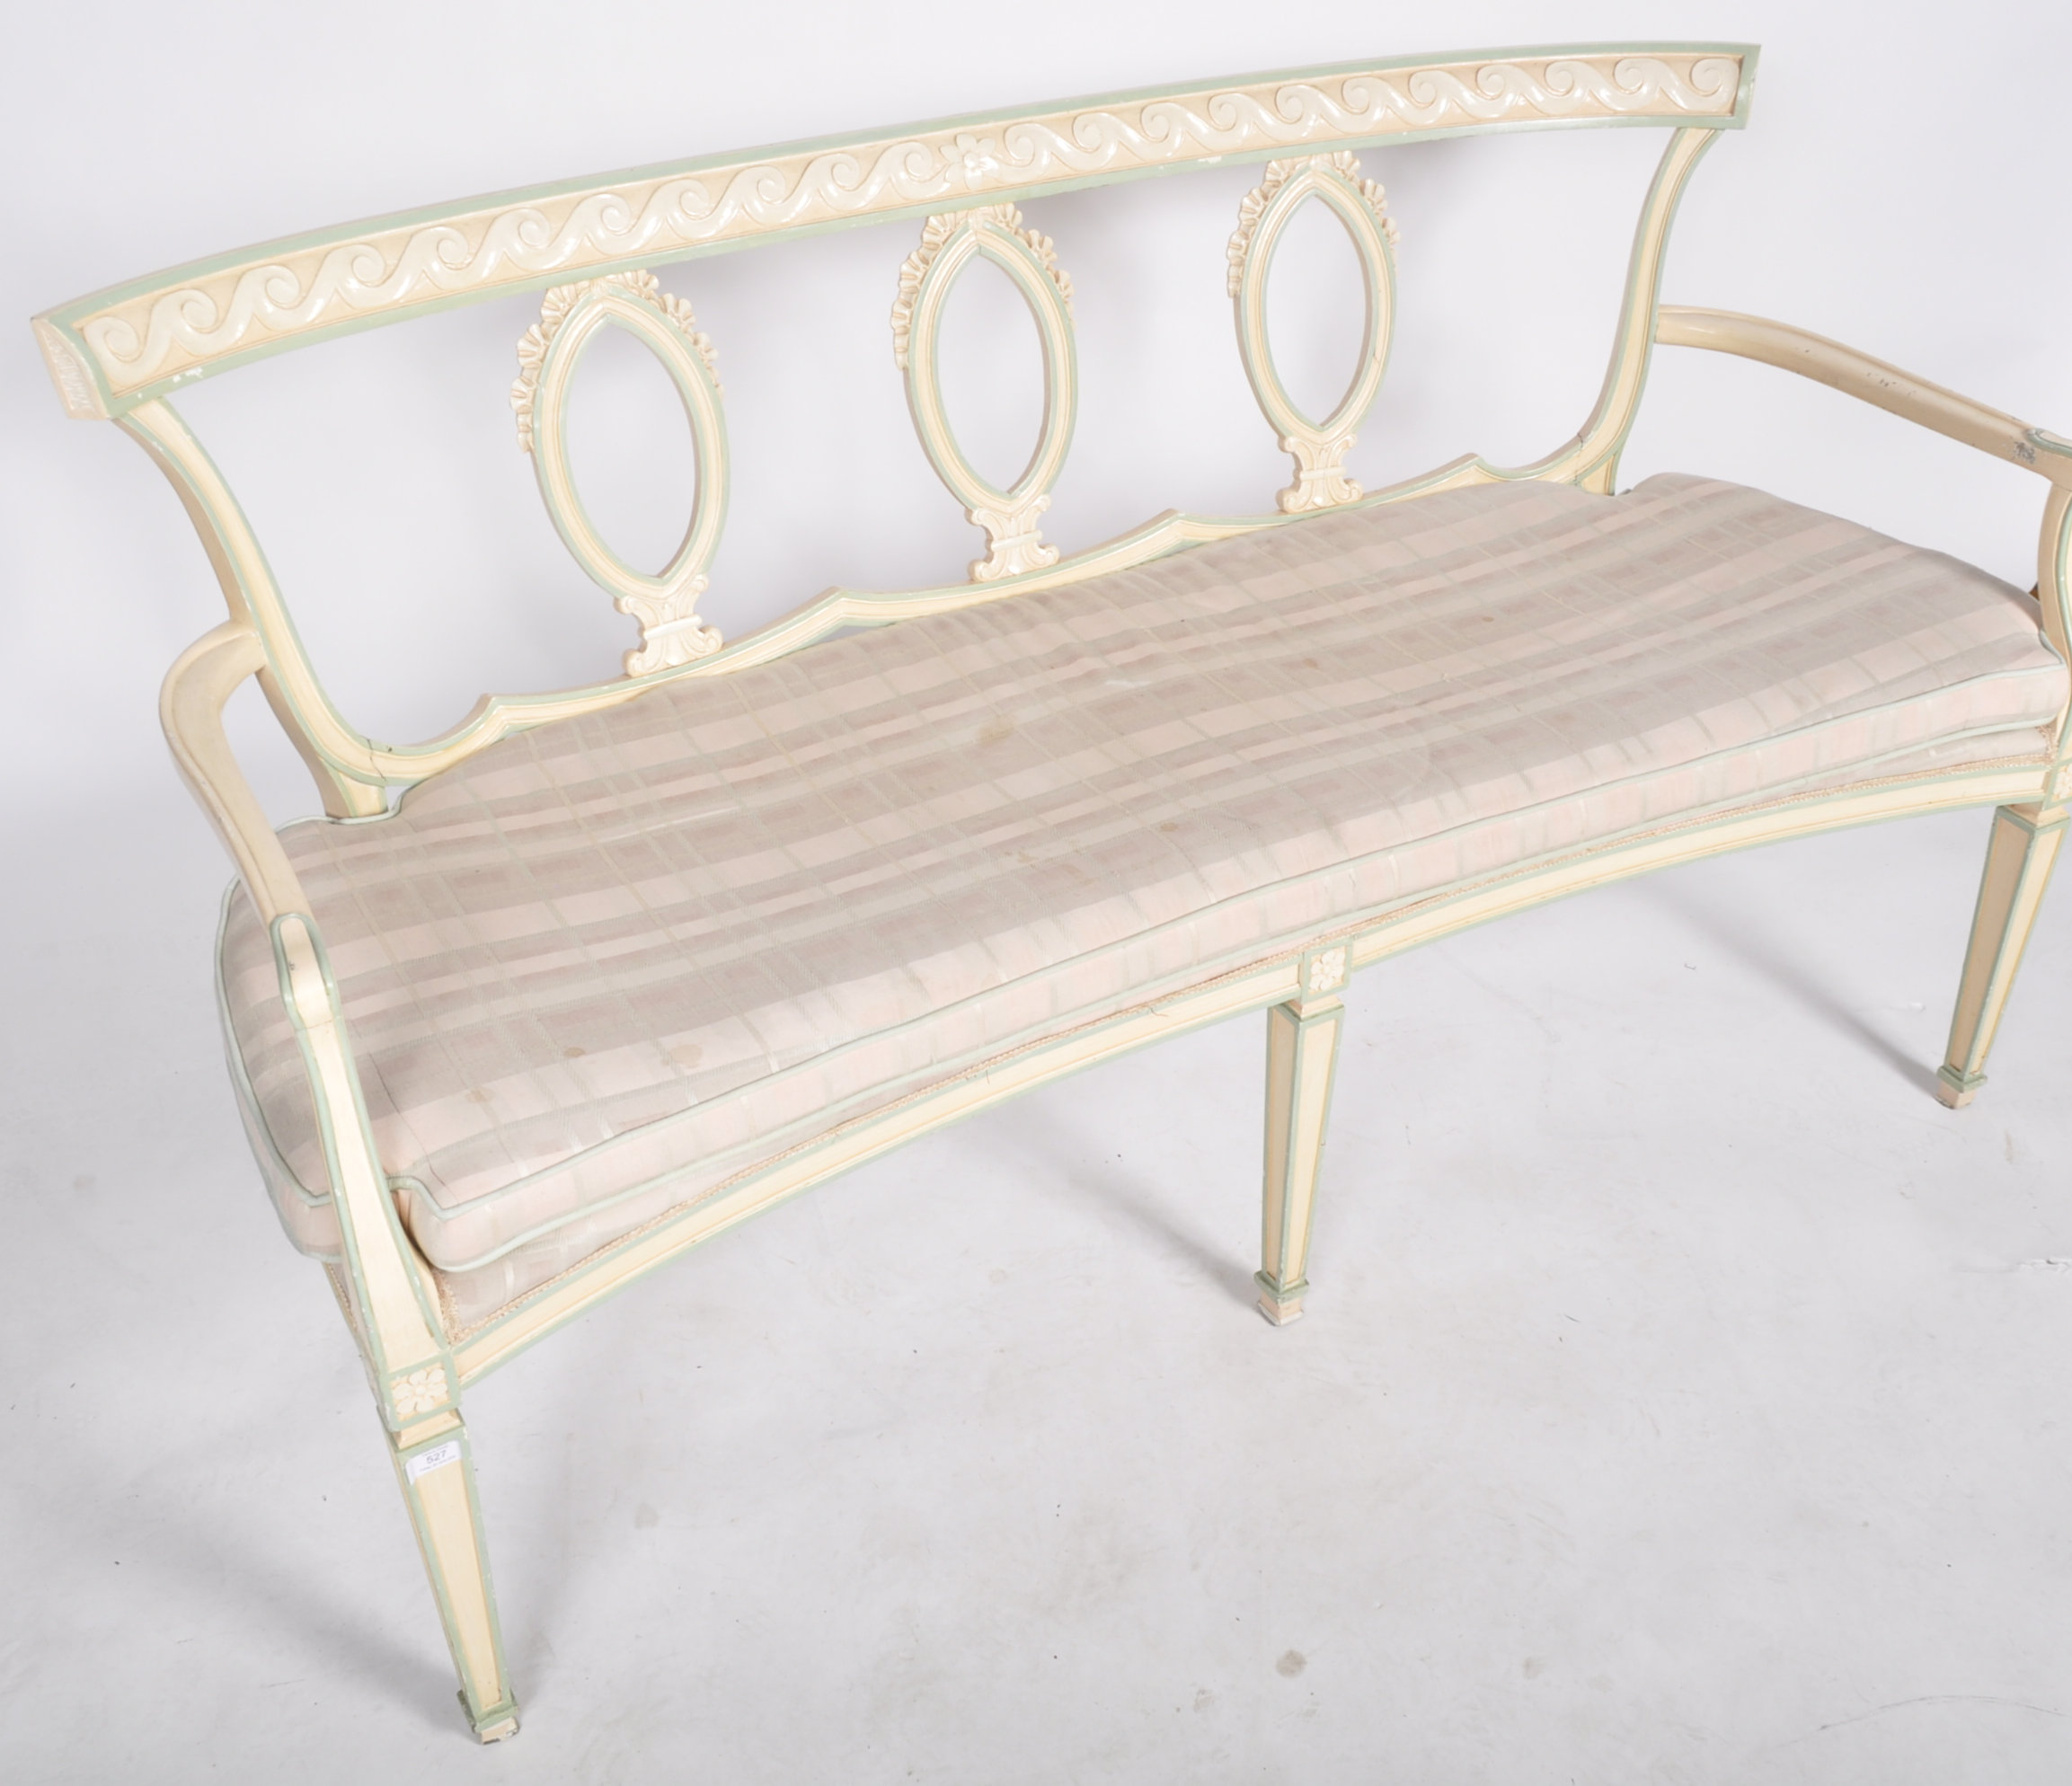 MID CENTURY FRENCH INFLUENCED TWO SEATER SALON SOFA - Image 3 of 5